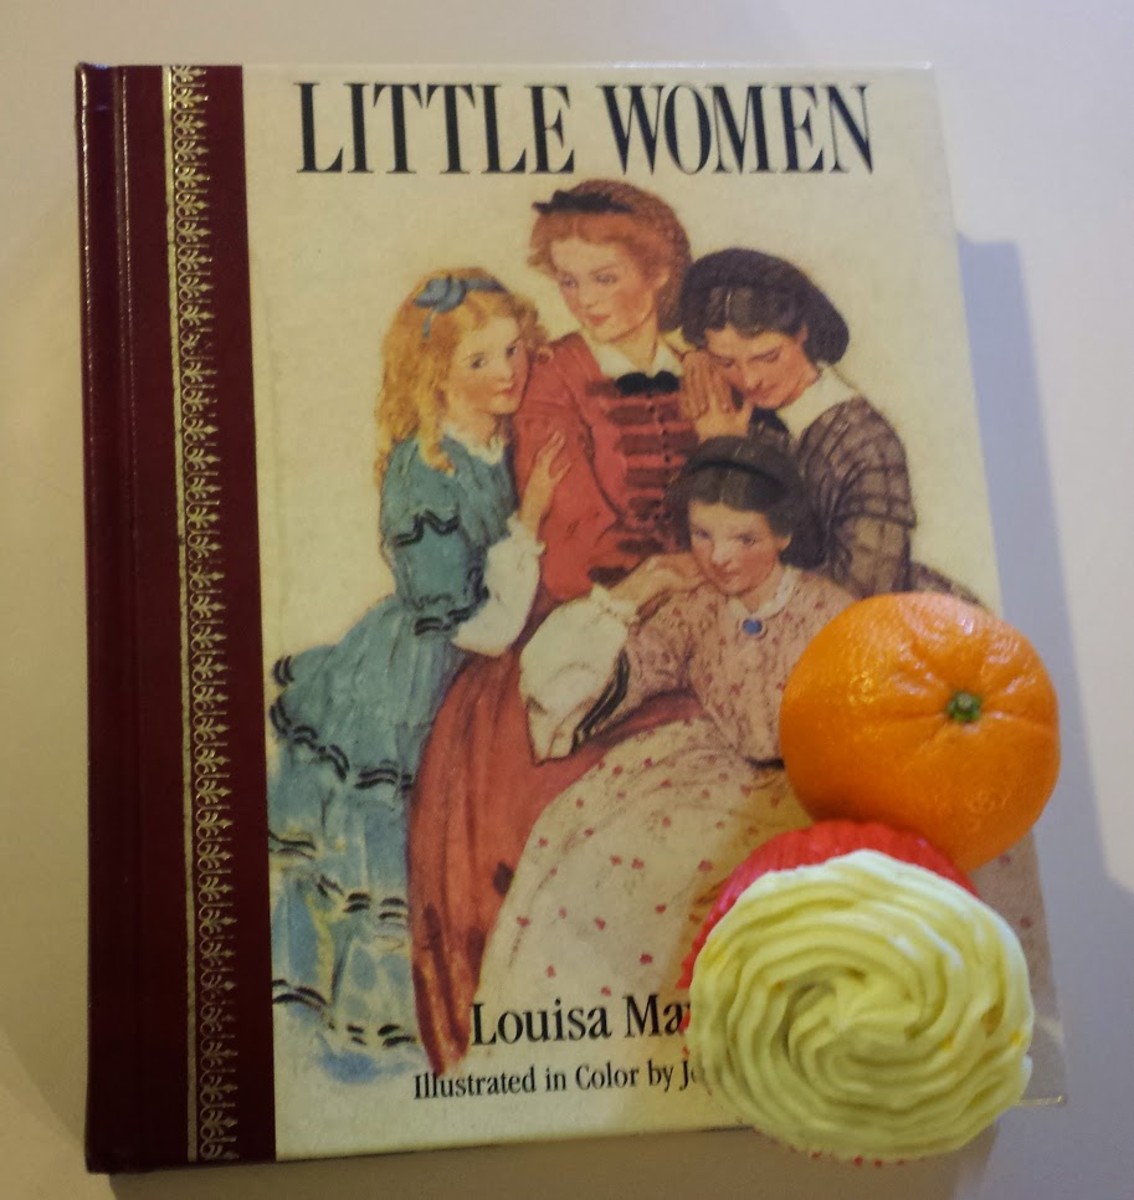 Join the "Little Women" discussion and enjoy the sweet treat at the end. 